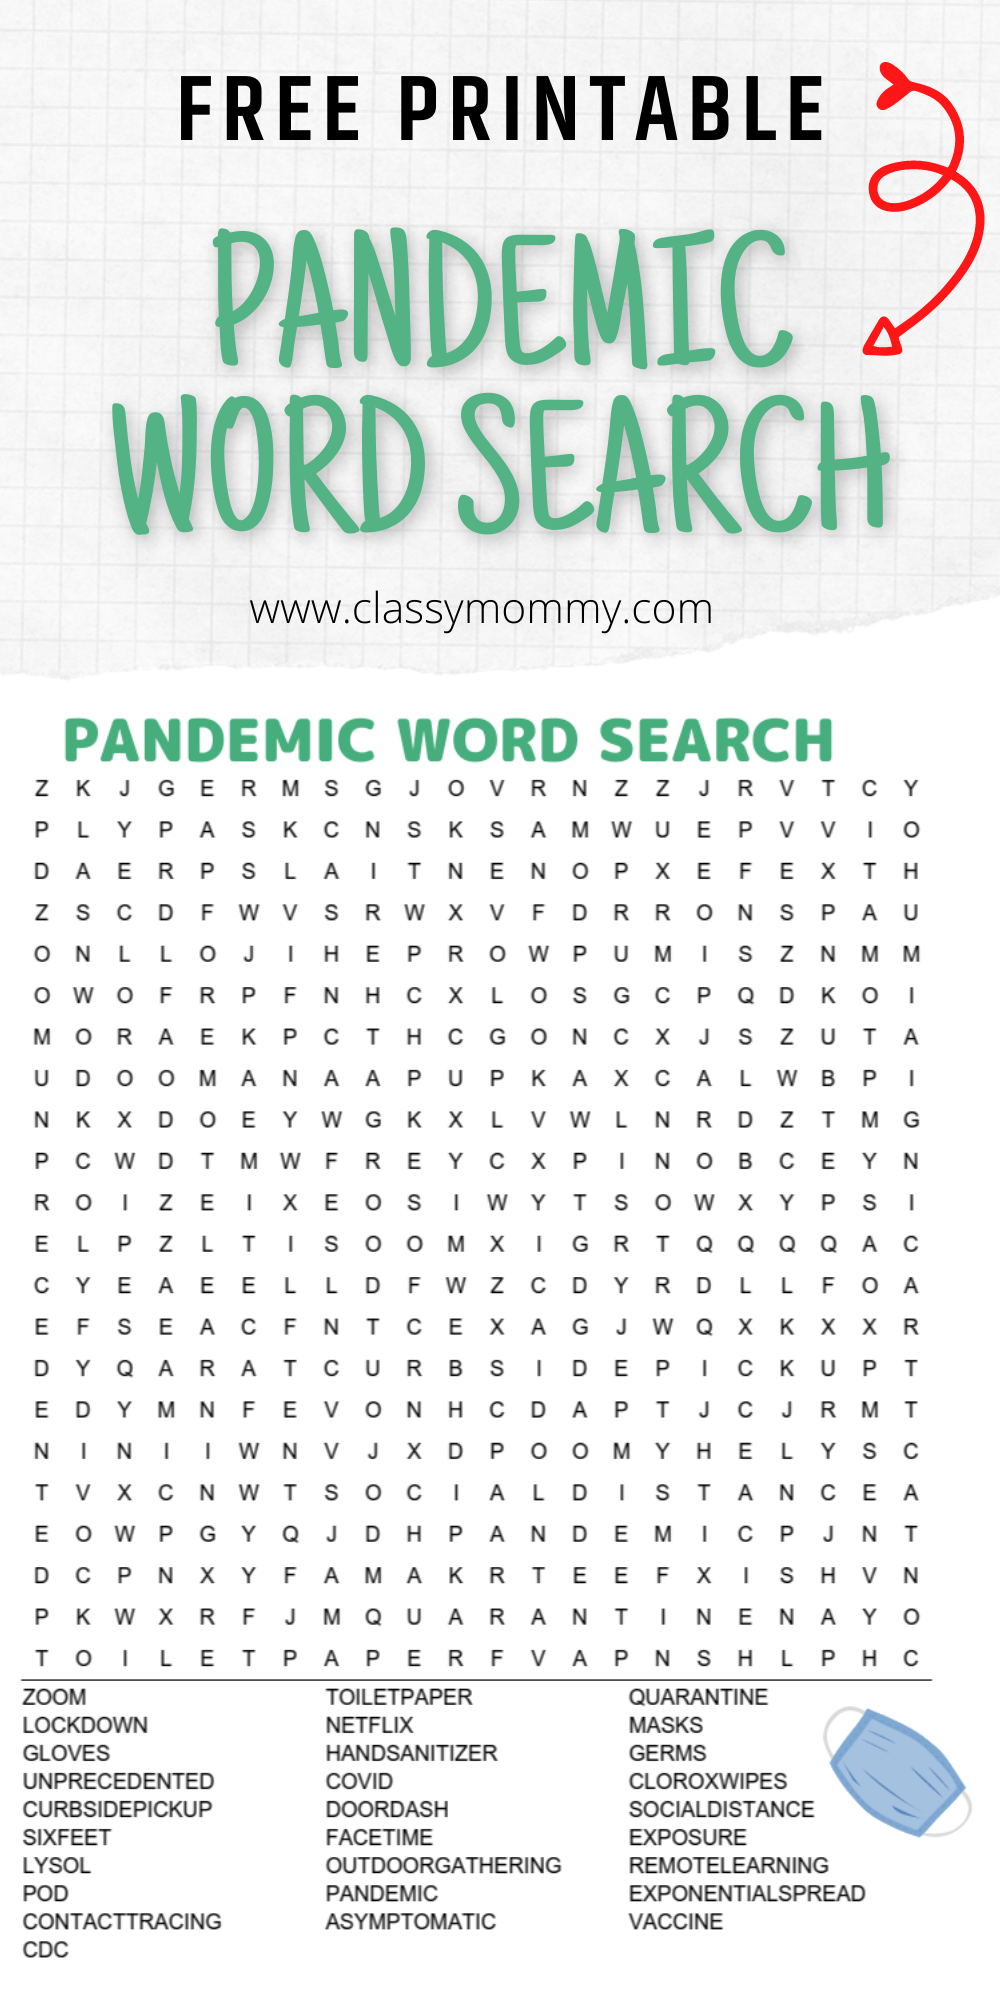 Free Printable Pandemic Word Search Classy Mommy